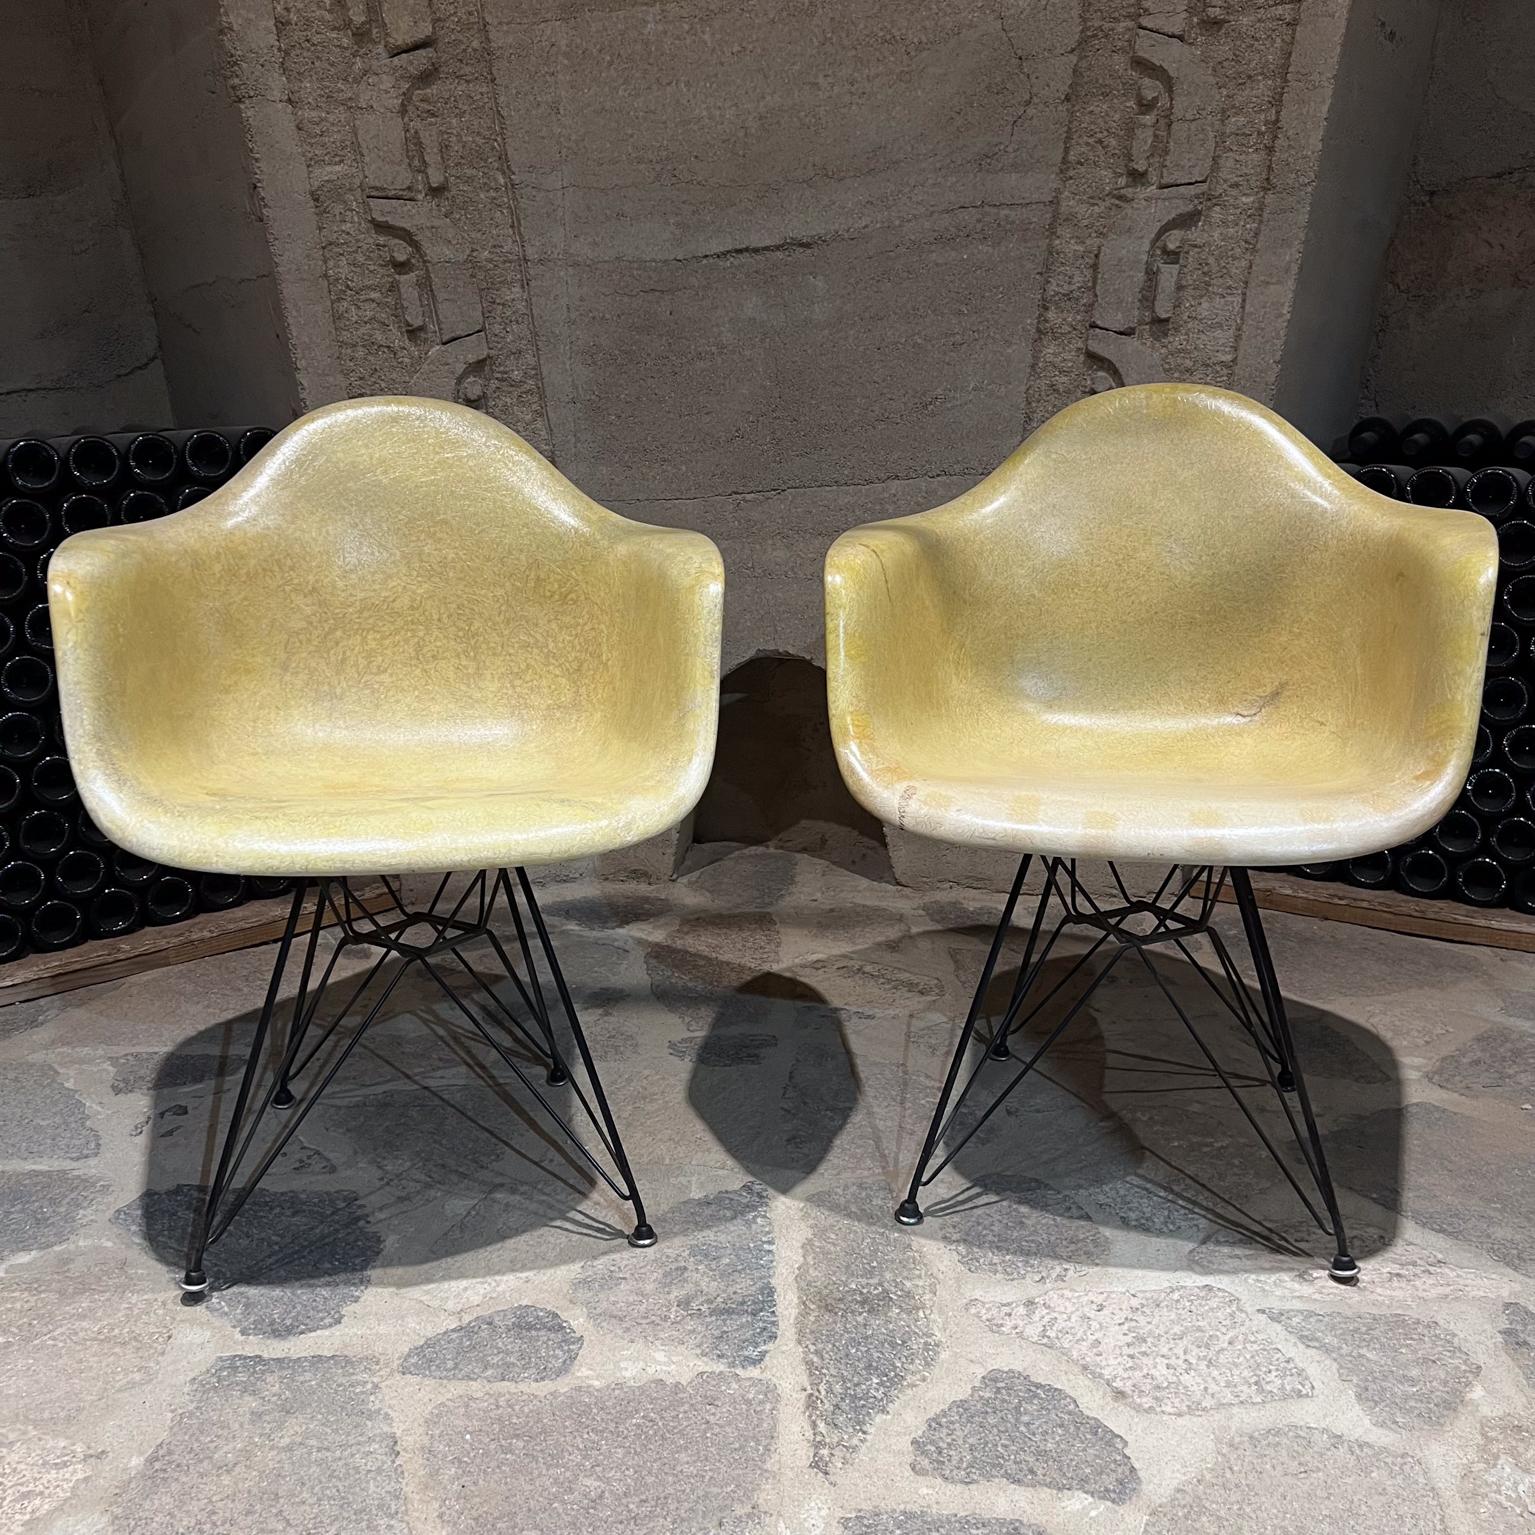 Herman Miller Eiffel Parchment Fiberglass Chair Set of Two
31 tall x 24.75 w x 23.75 d, Seat 18 Arm rest 26
Original vintage unrestored preowned condition. Wear visible.
Refer to all images.

